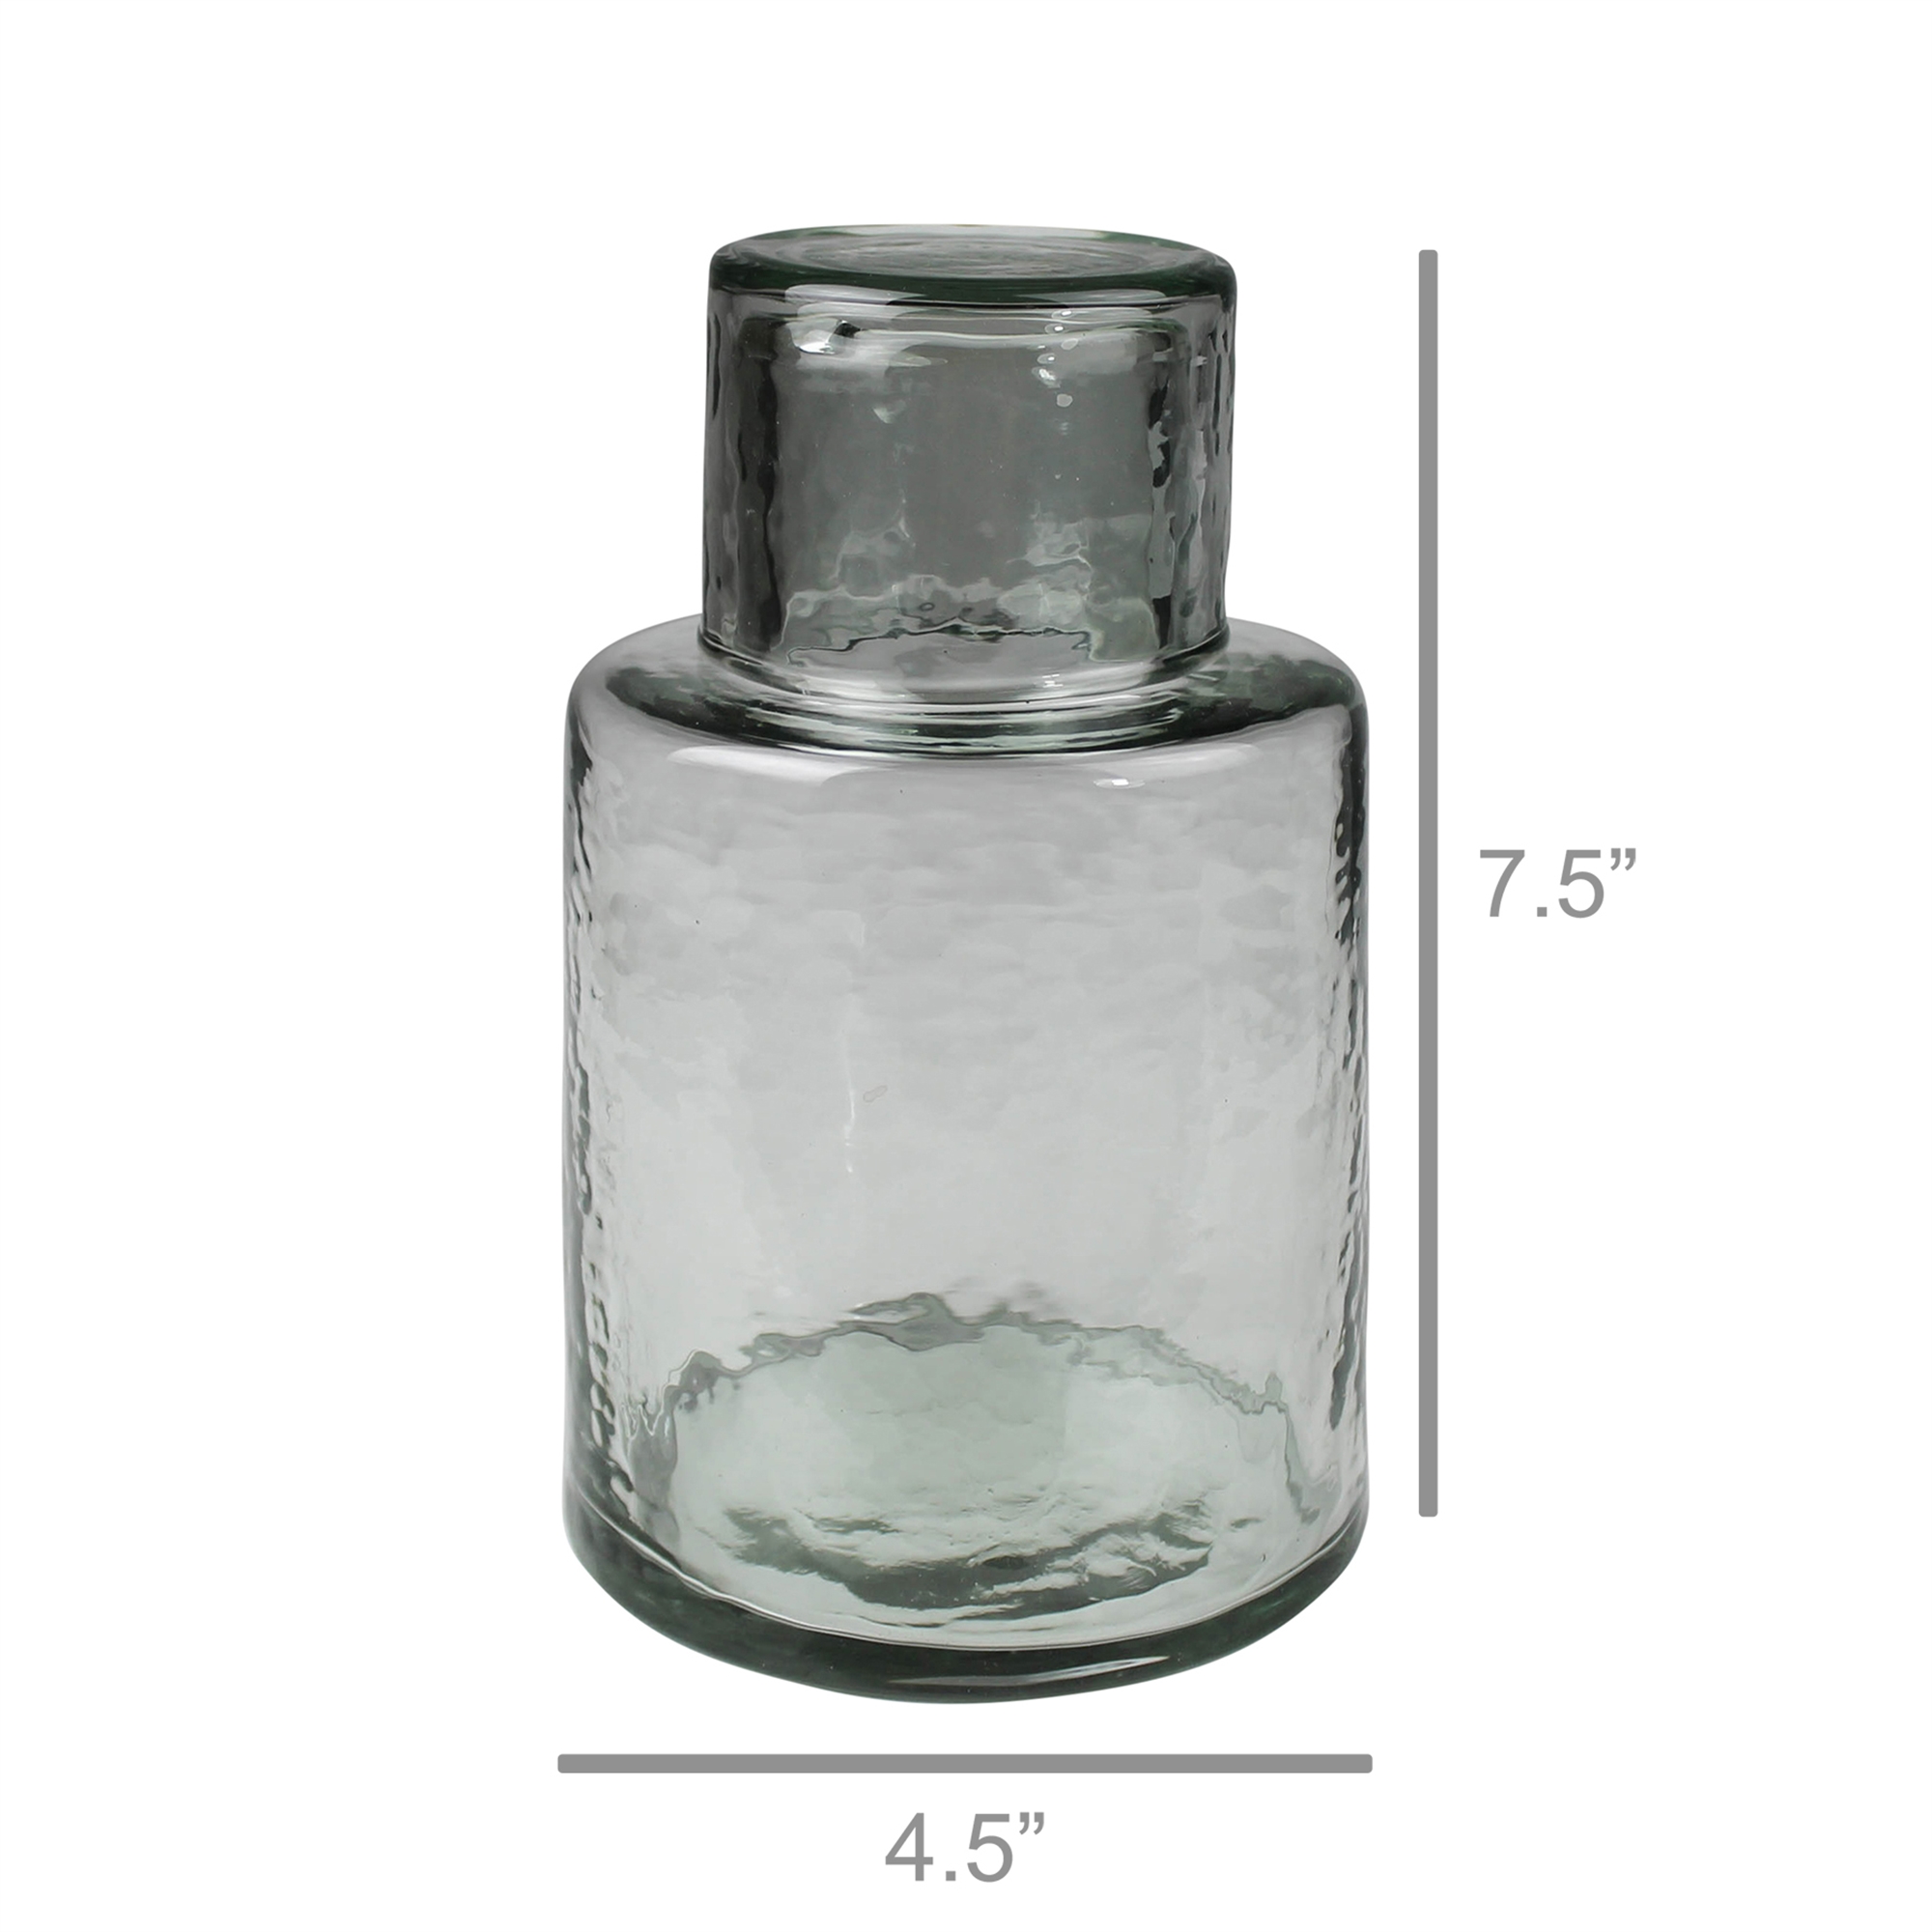 Bedside Water Carafe in Clear Recycled Glass